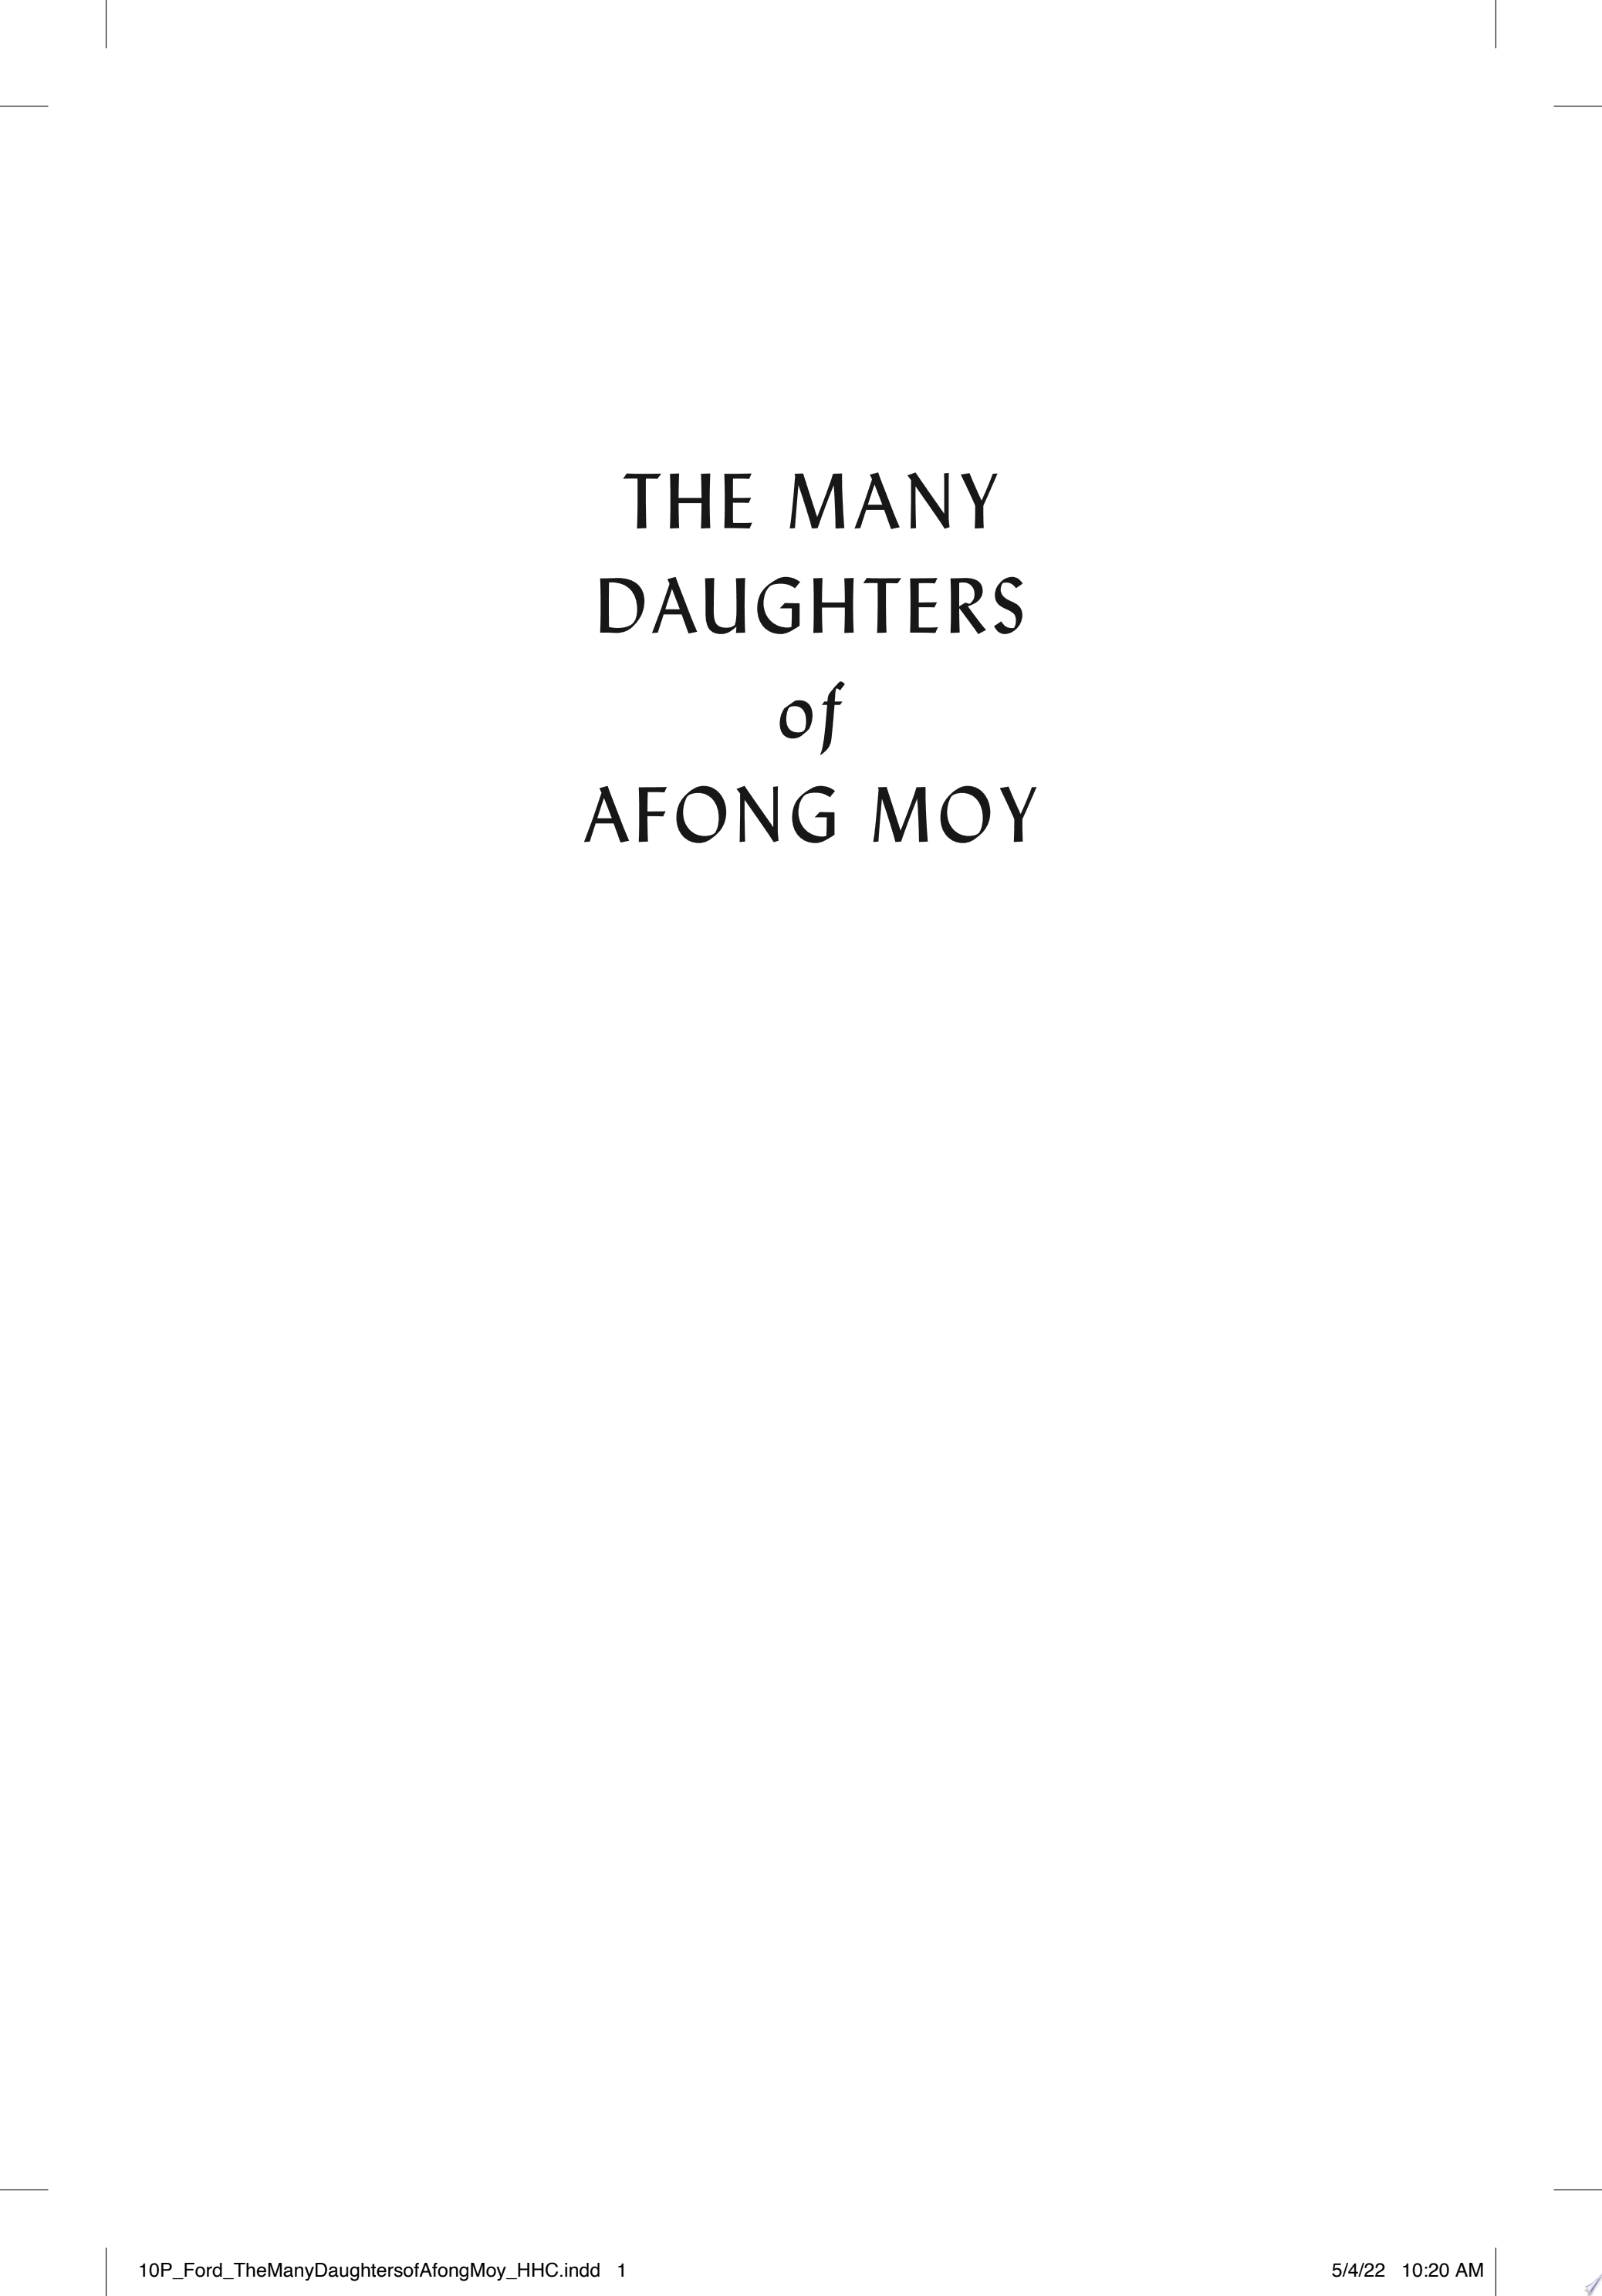 Image for "The Many Daughters of Afong Moy"